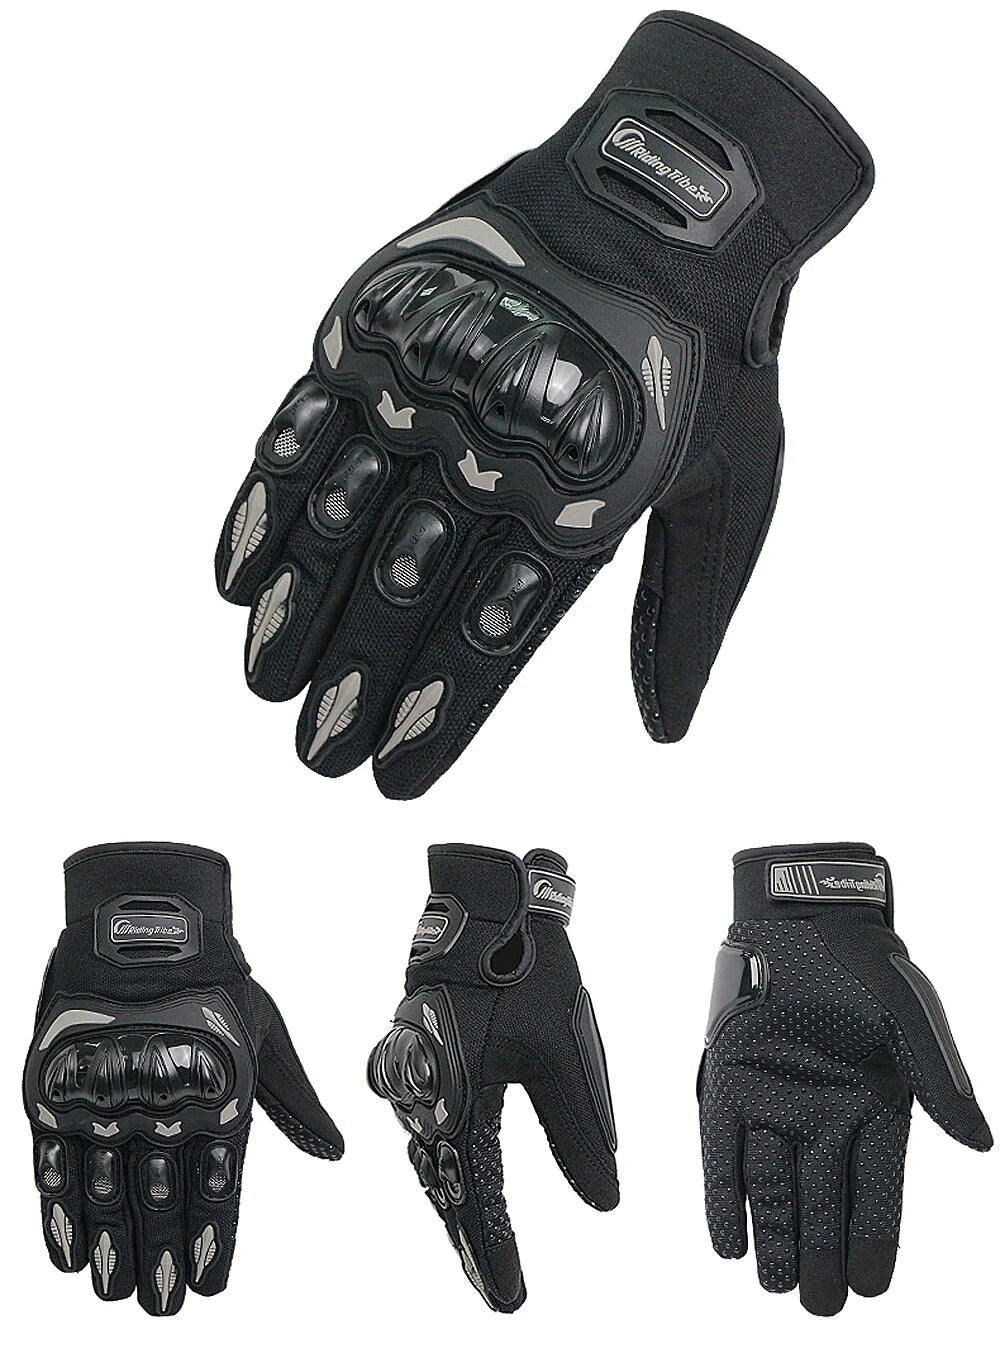 RideArmor Full Protection Touchscreen Motorcycle Gloves - Motorcycle gloves Readi Gear